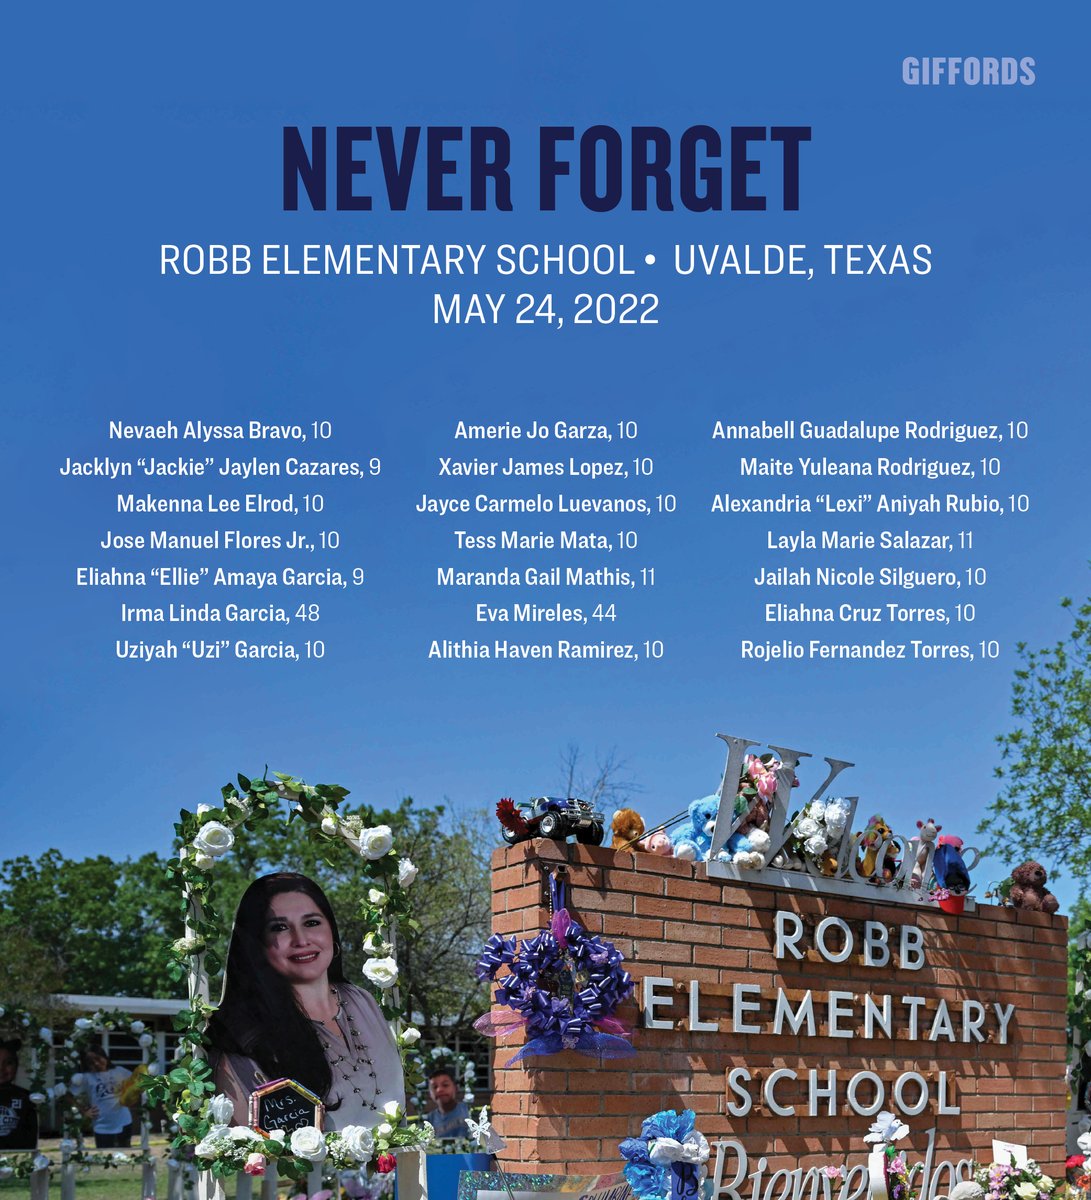 Two years ago today, 19 fourth-graders and two teachers were shot and killed at Robb Elementary School in Uvalde, Texas by an 18-year-old armed with an AR-style rifle. Seventeen more people were injured and face a lifetime of recovery that no one should ever have to bear.